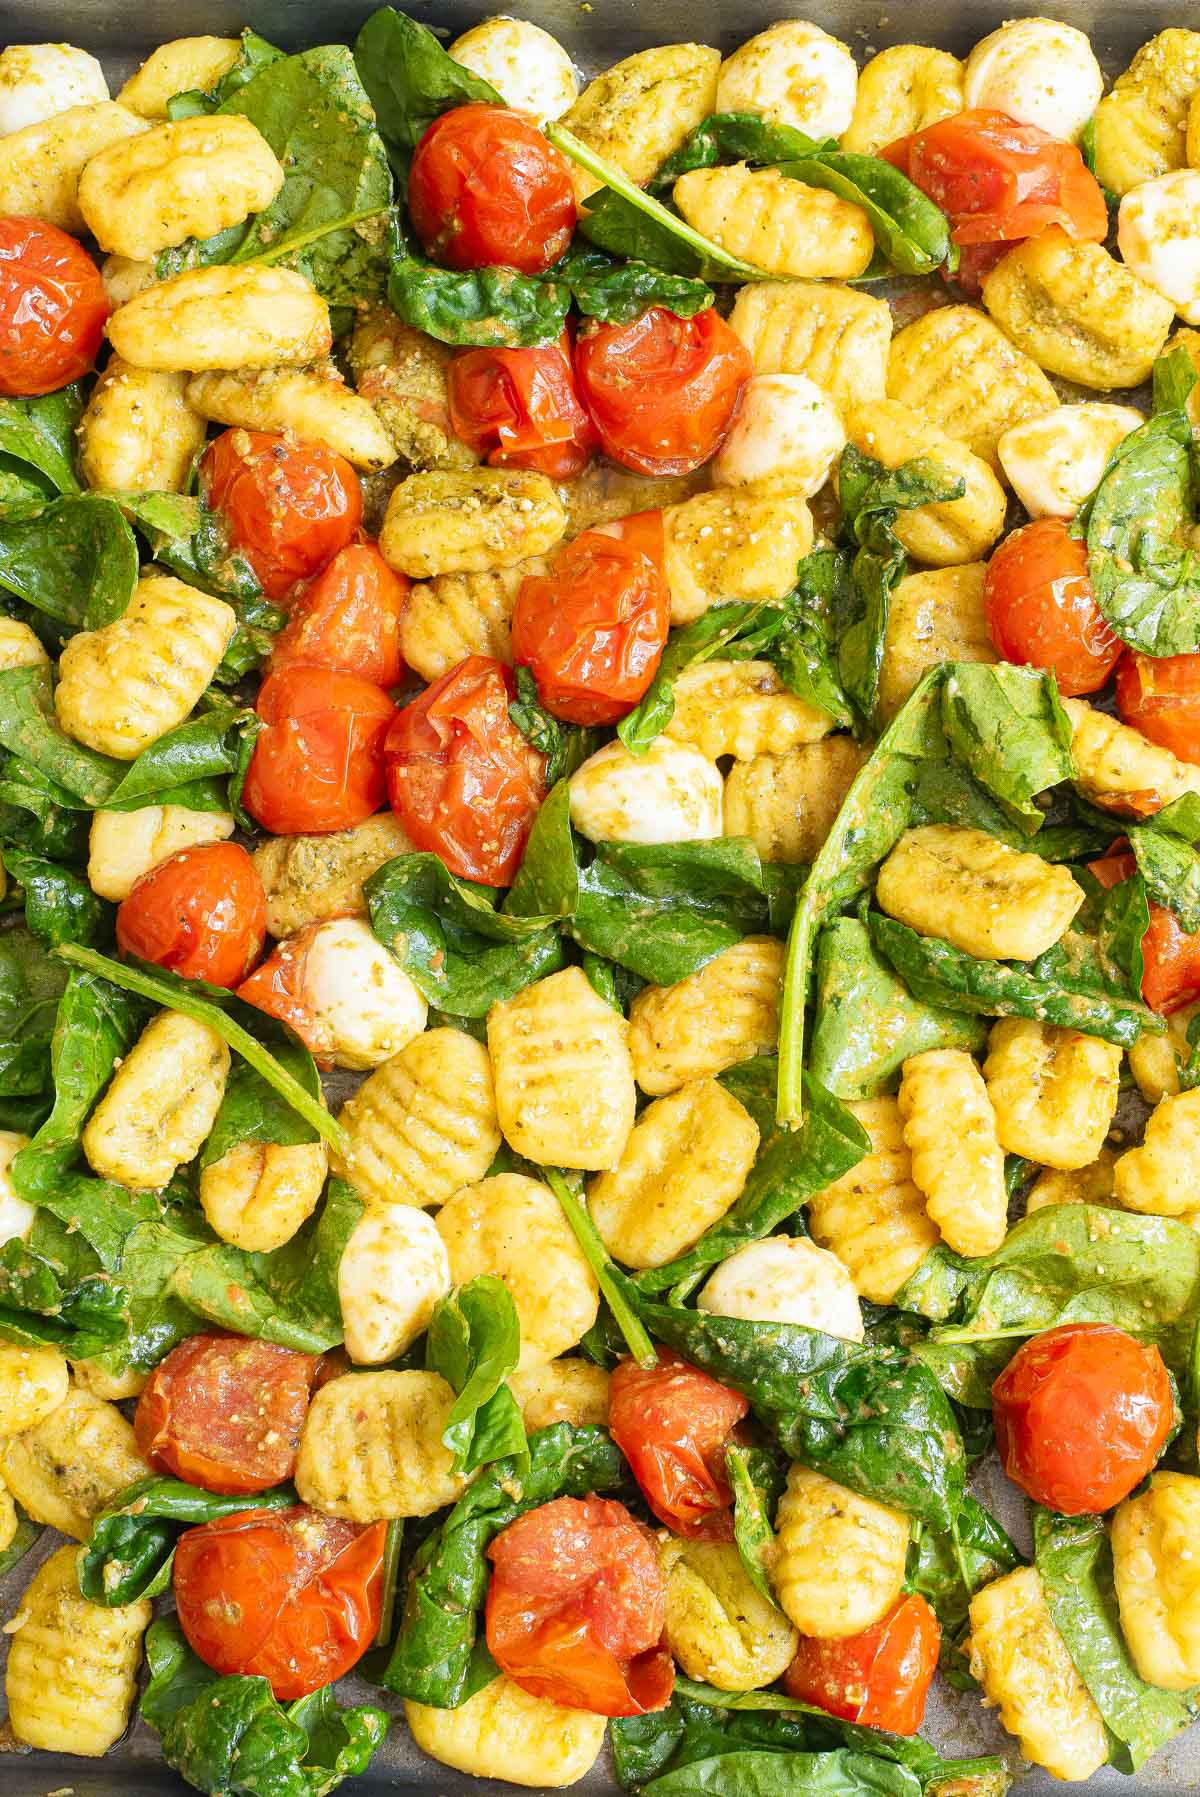 A close-up view of the sheet pan dinner, highlighting the texture of the gnocchi, tomatoes, and spinach.